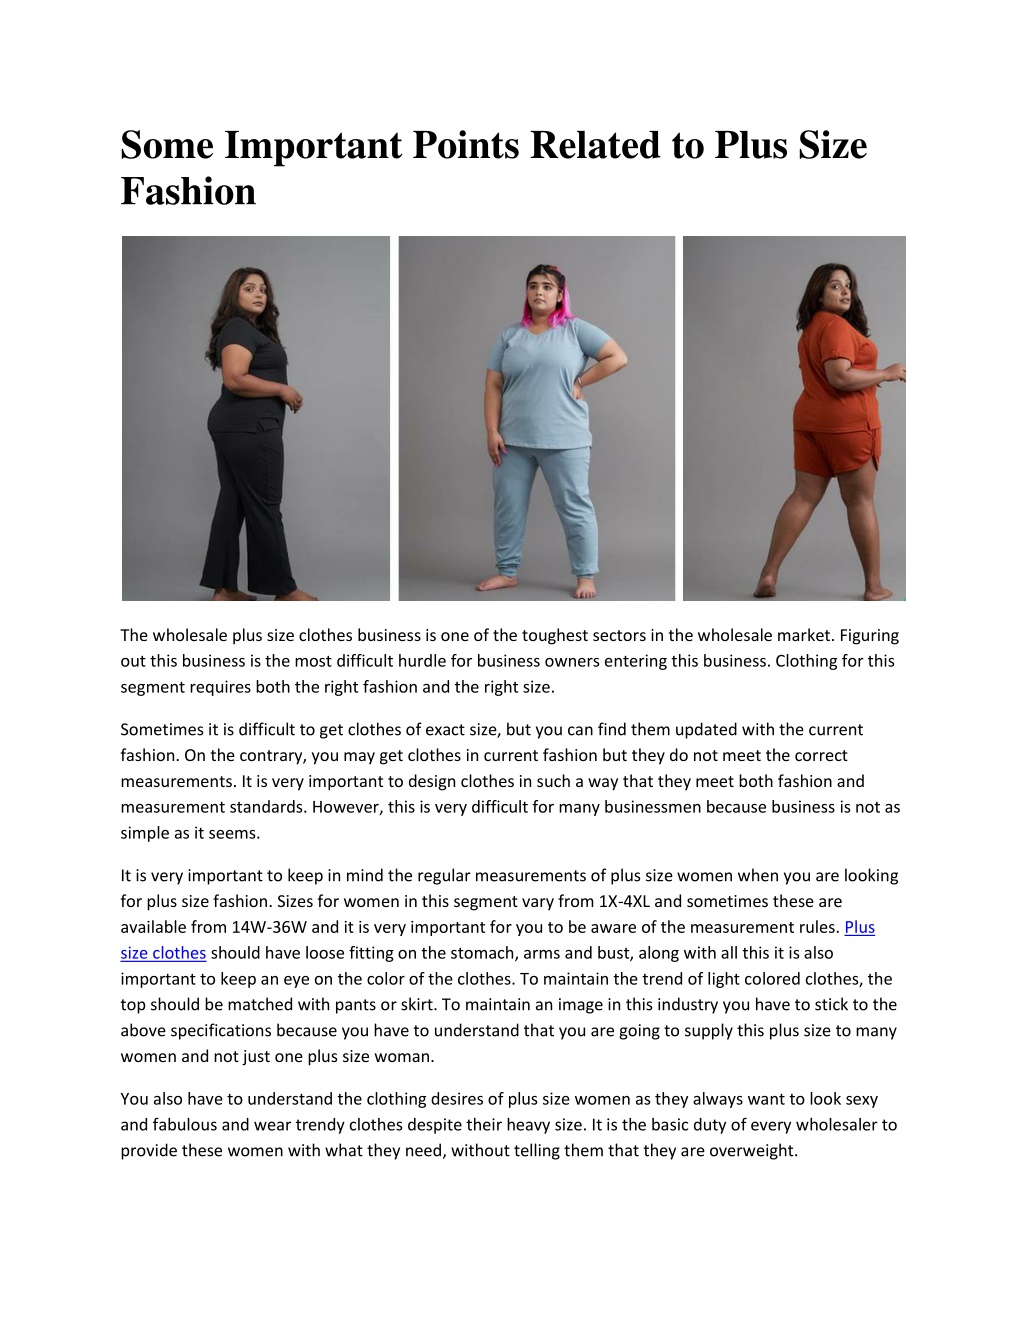 PPT - Some Important Points Related to Plus Size Fashion PowerPoint  Presentation - ID:12536506